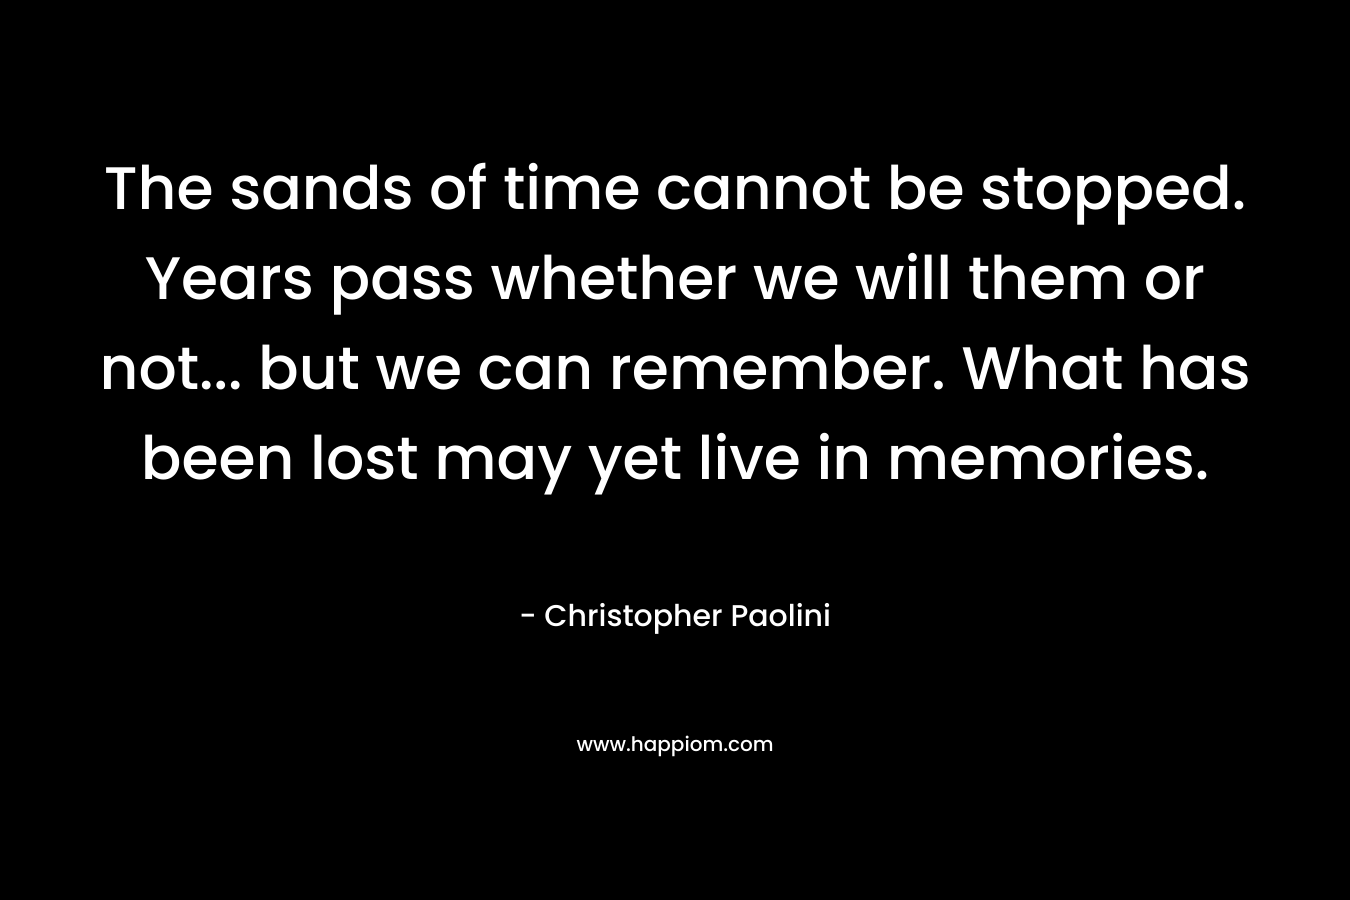 The sands of time cannot be stopped. Years pass whether we will them or not… but we can remember. What has been lost may yet live in memories. – Christopher Paolini